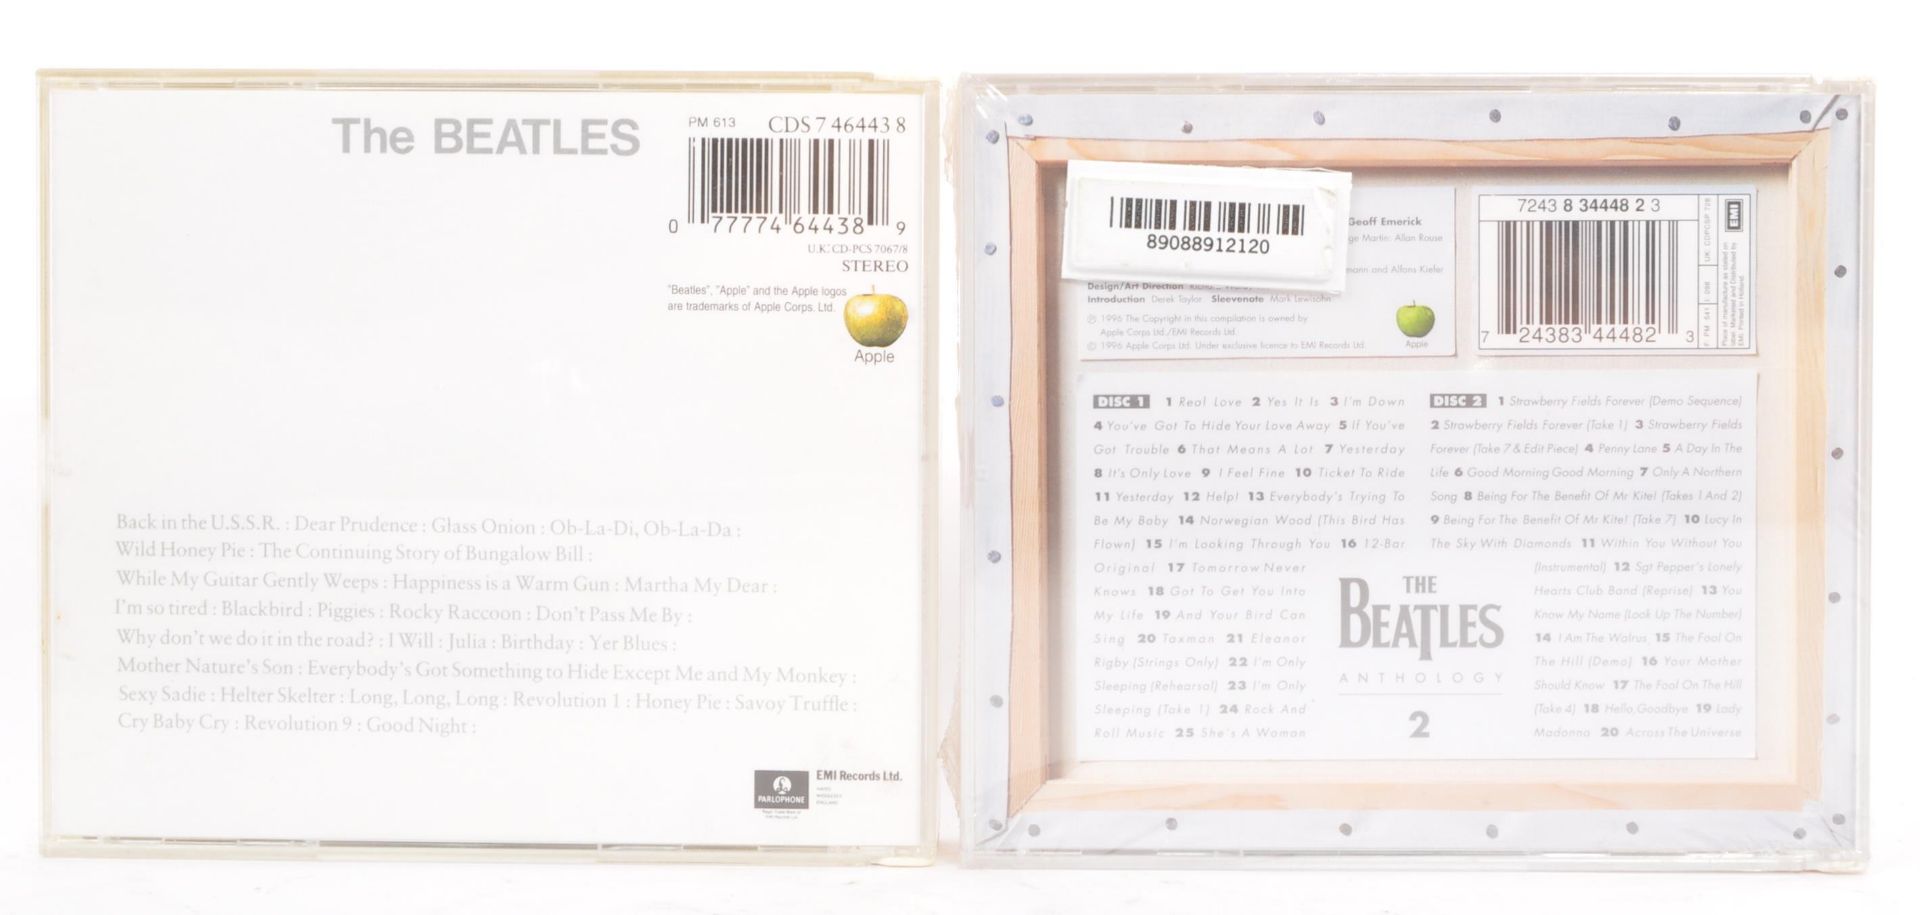 THE BEATLES - COLLECTION OF COMPACT DISC ALBUM & SINGLE - Image 5 of 7